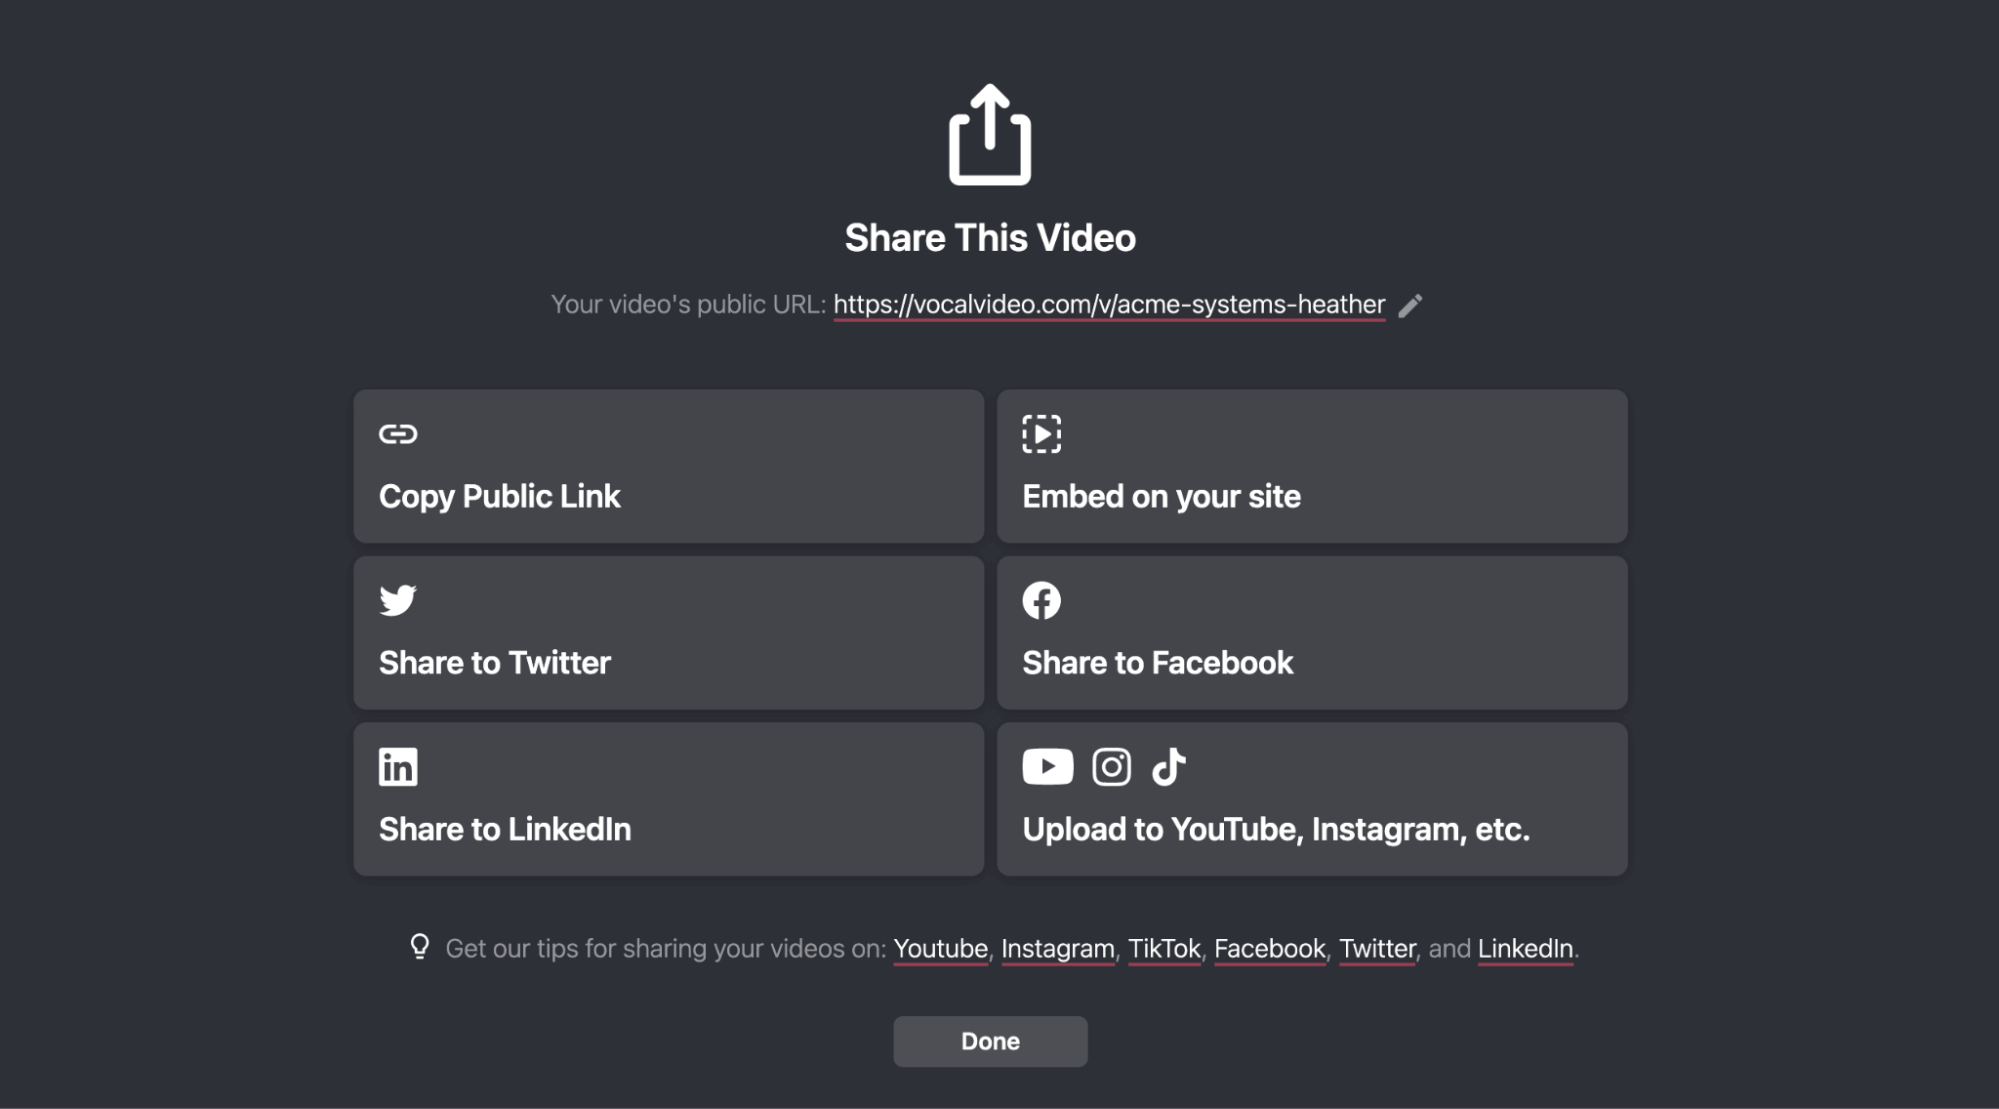 Share This Video: Copy Public Link, Embed on your site, Share to Twitter, Facebook, LinkedIn, Upload to YouTube, Instagram, etc.